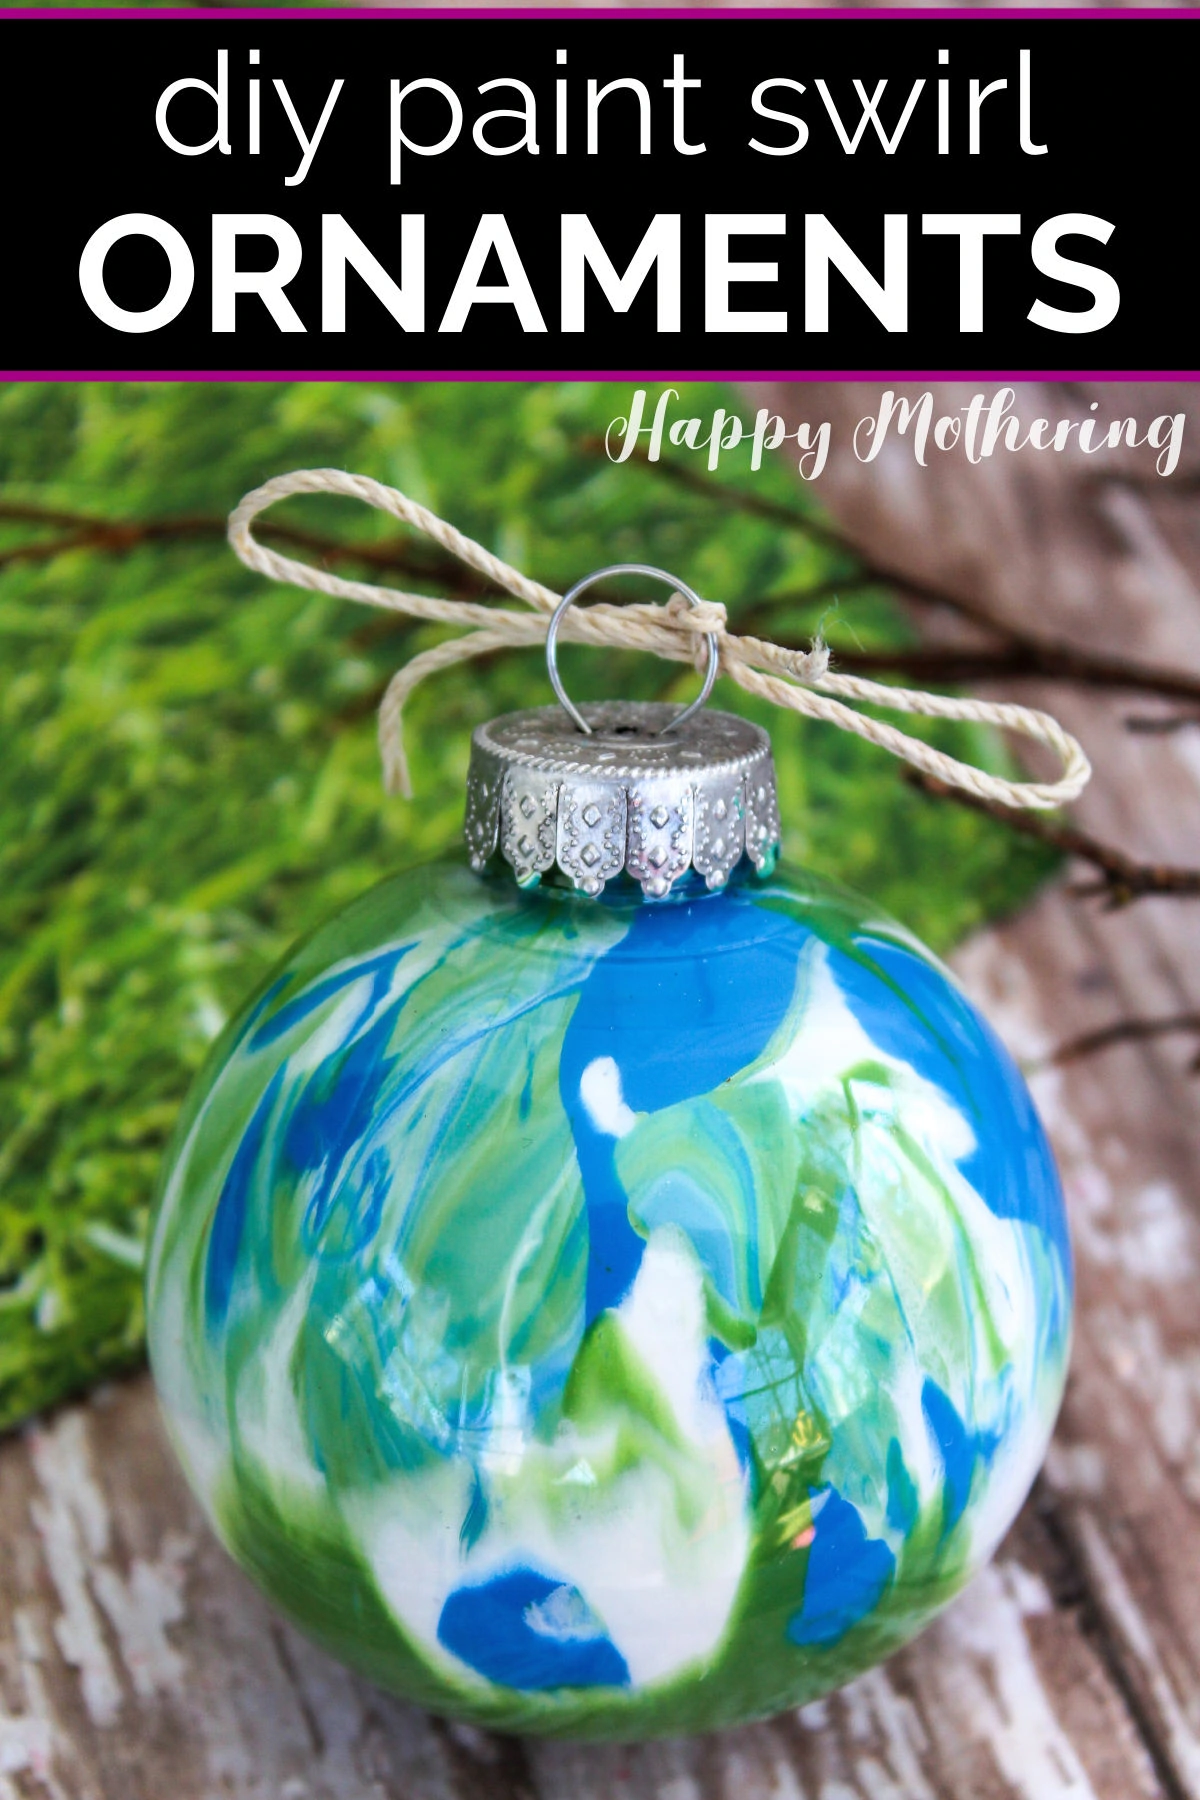 Completed paint swirl ornament with green, blue and white acrylic paint.